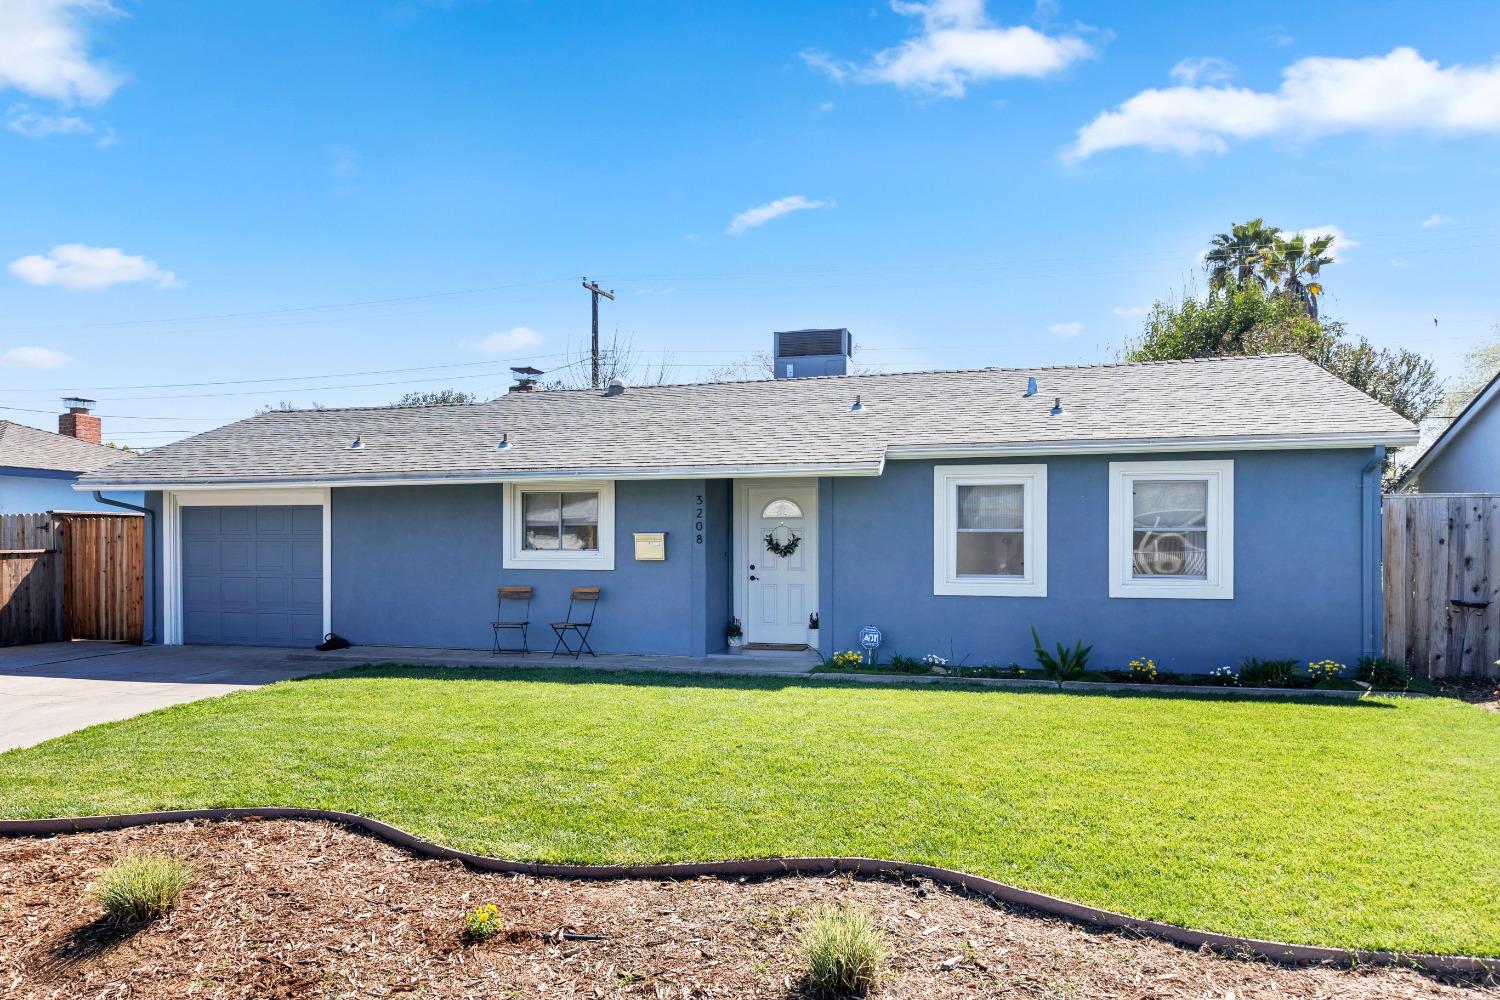 Photo of 3208 Wemberley Dr in Sacramento, CA